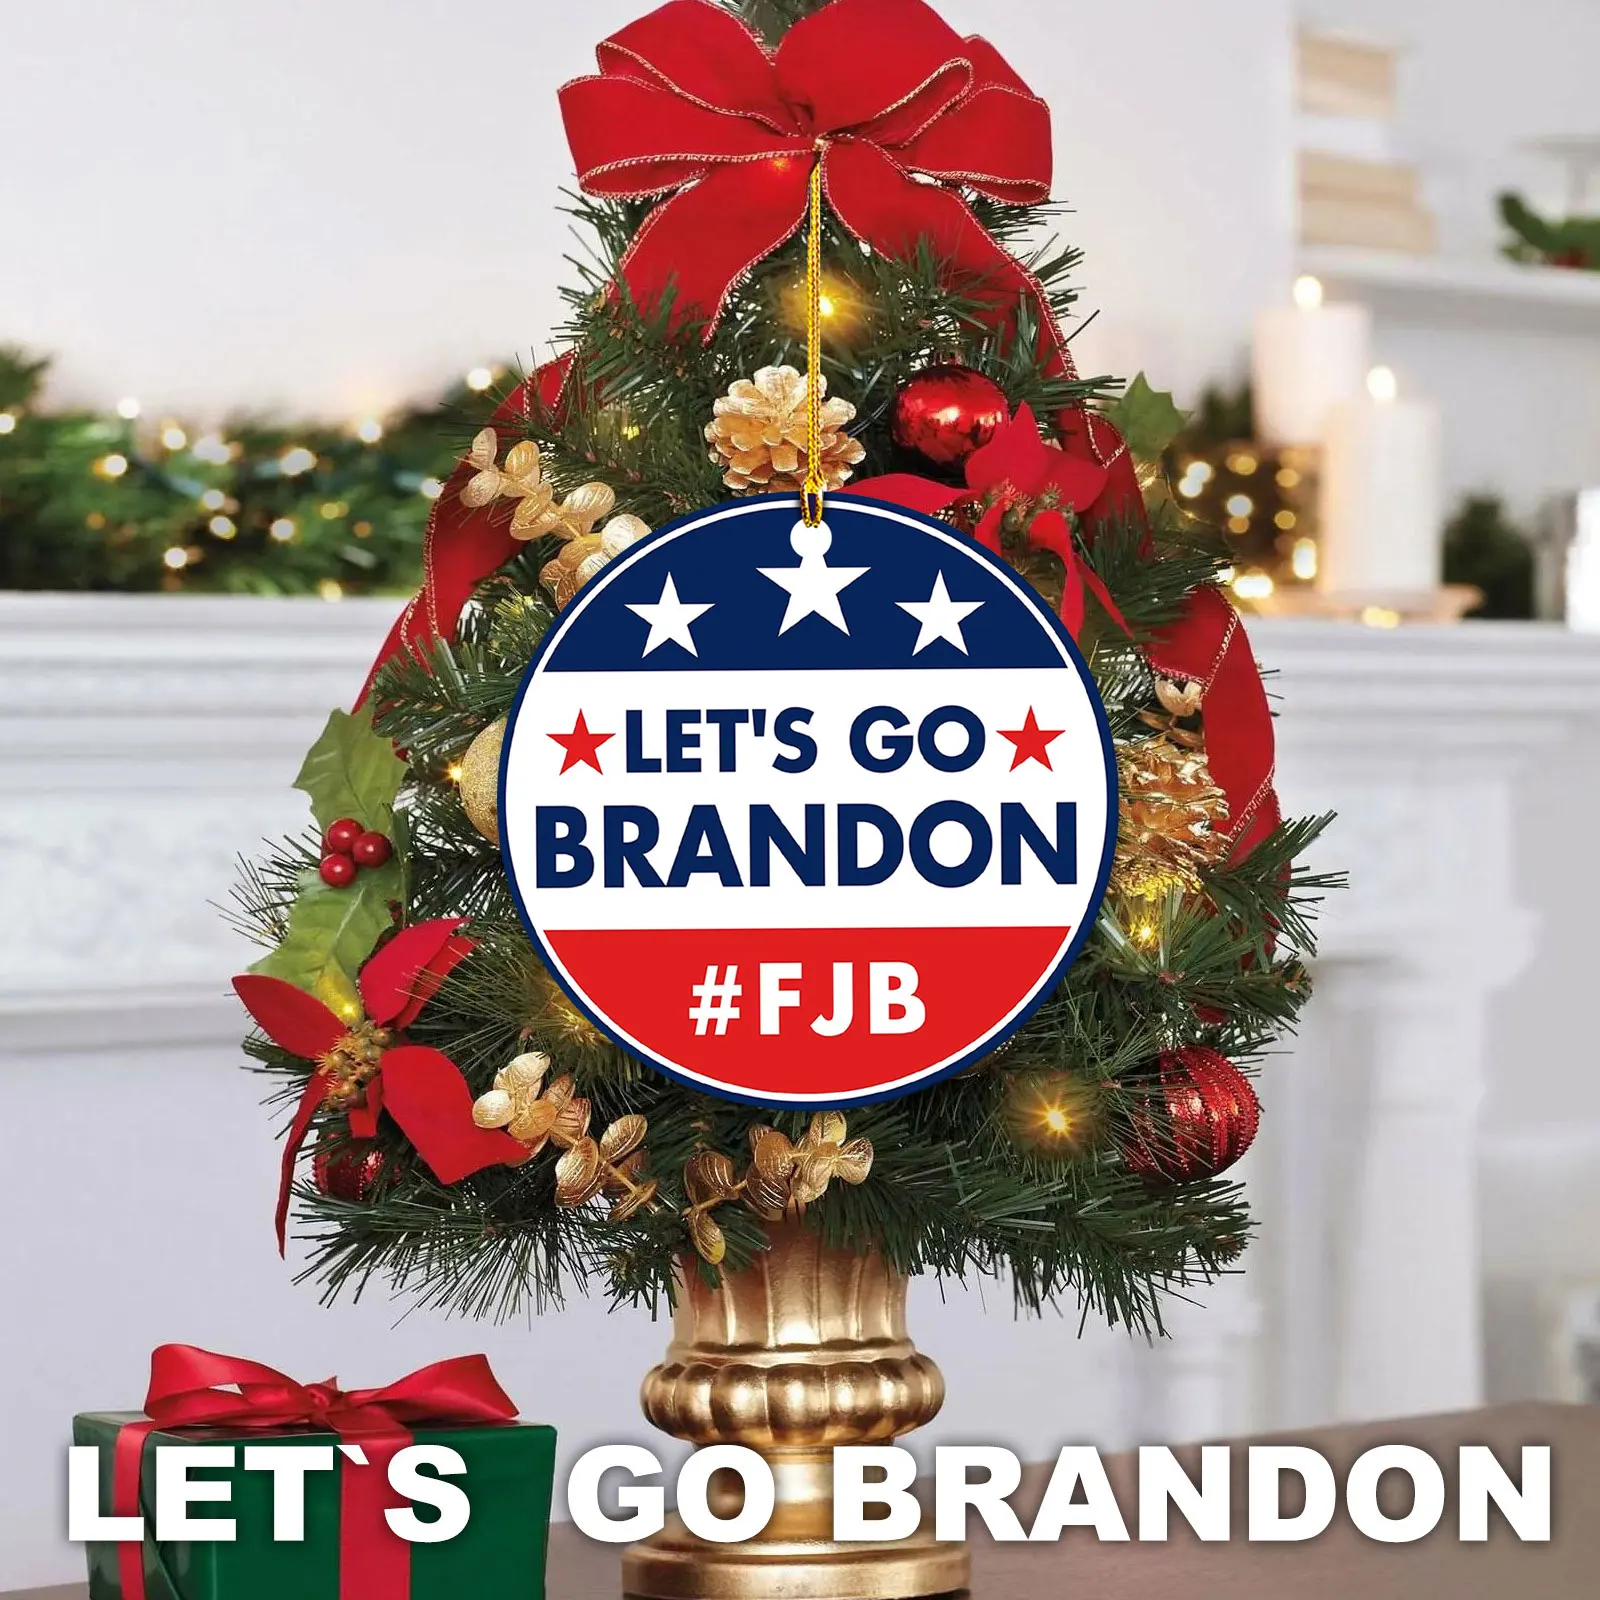 

Hanging Ornament - Lets Go Brandon FJB Round Hangings Pendants Ornaments Funny Housewarming Ideas Gift for Family and Friends Fe